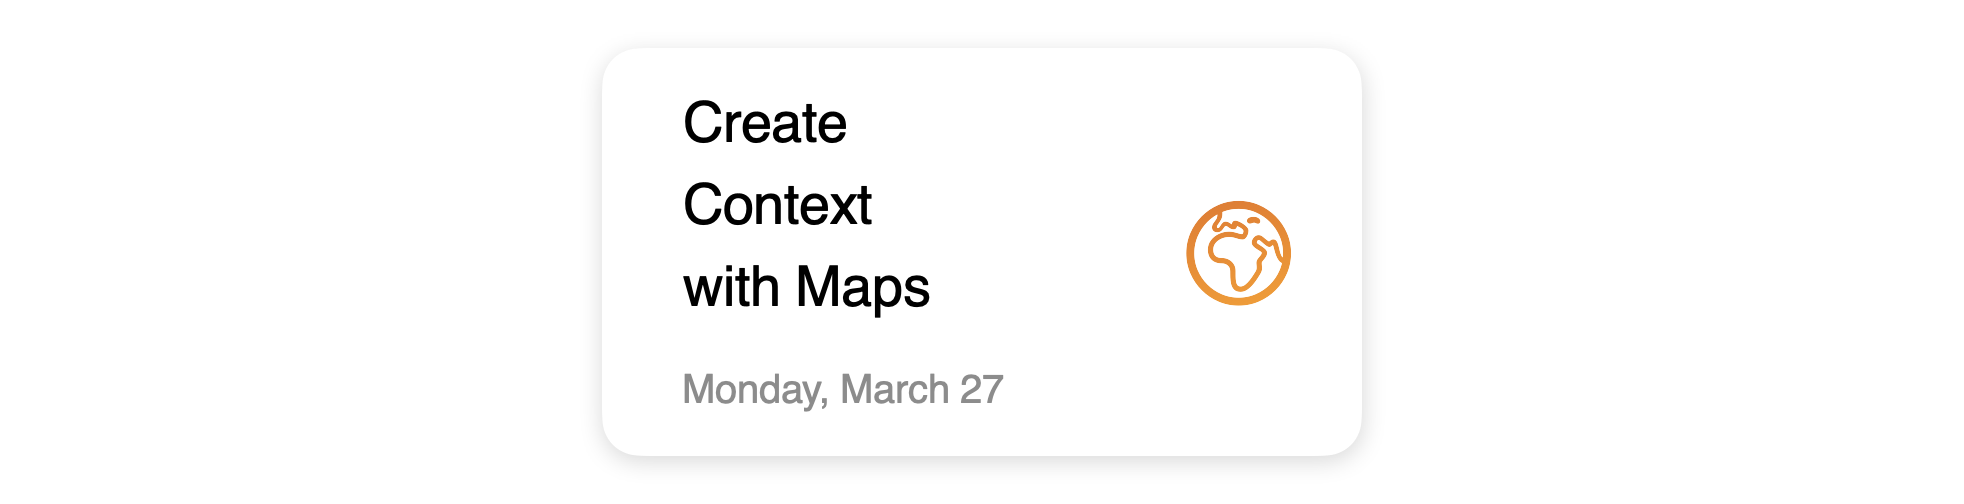 Create Context with Maps session schedule icon.